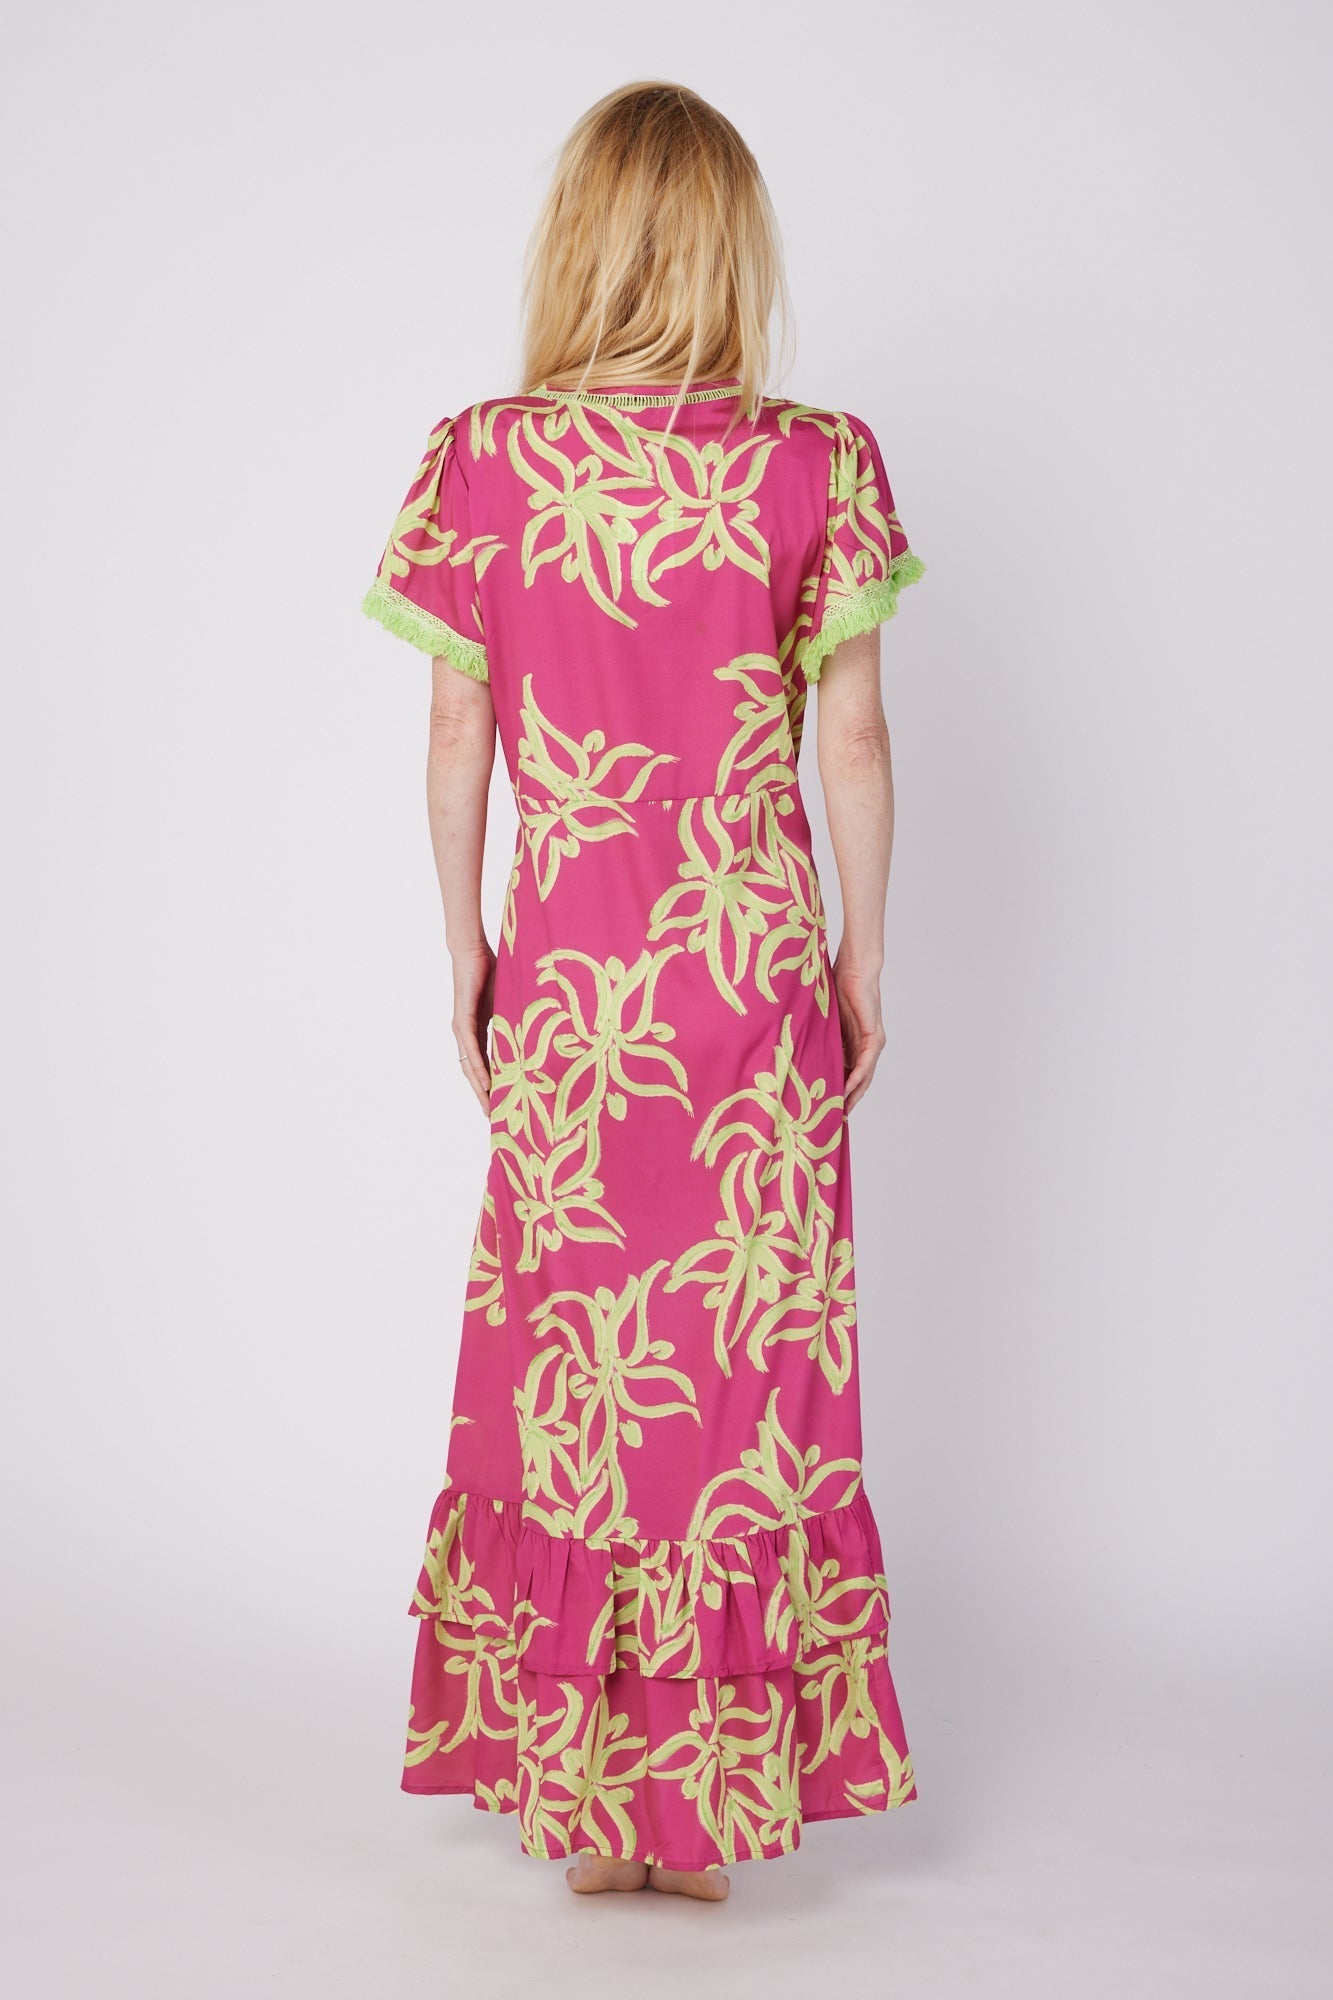 ModaPosa Brigida Short Sleeve V-Neck Maxi Dress with Fringe Trim in in Raspberry Lime Flower . Discover women's resort dresses and lifestyle clothing inspired by the Mediterranean. Free worldwide shipping available!